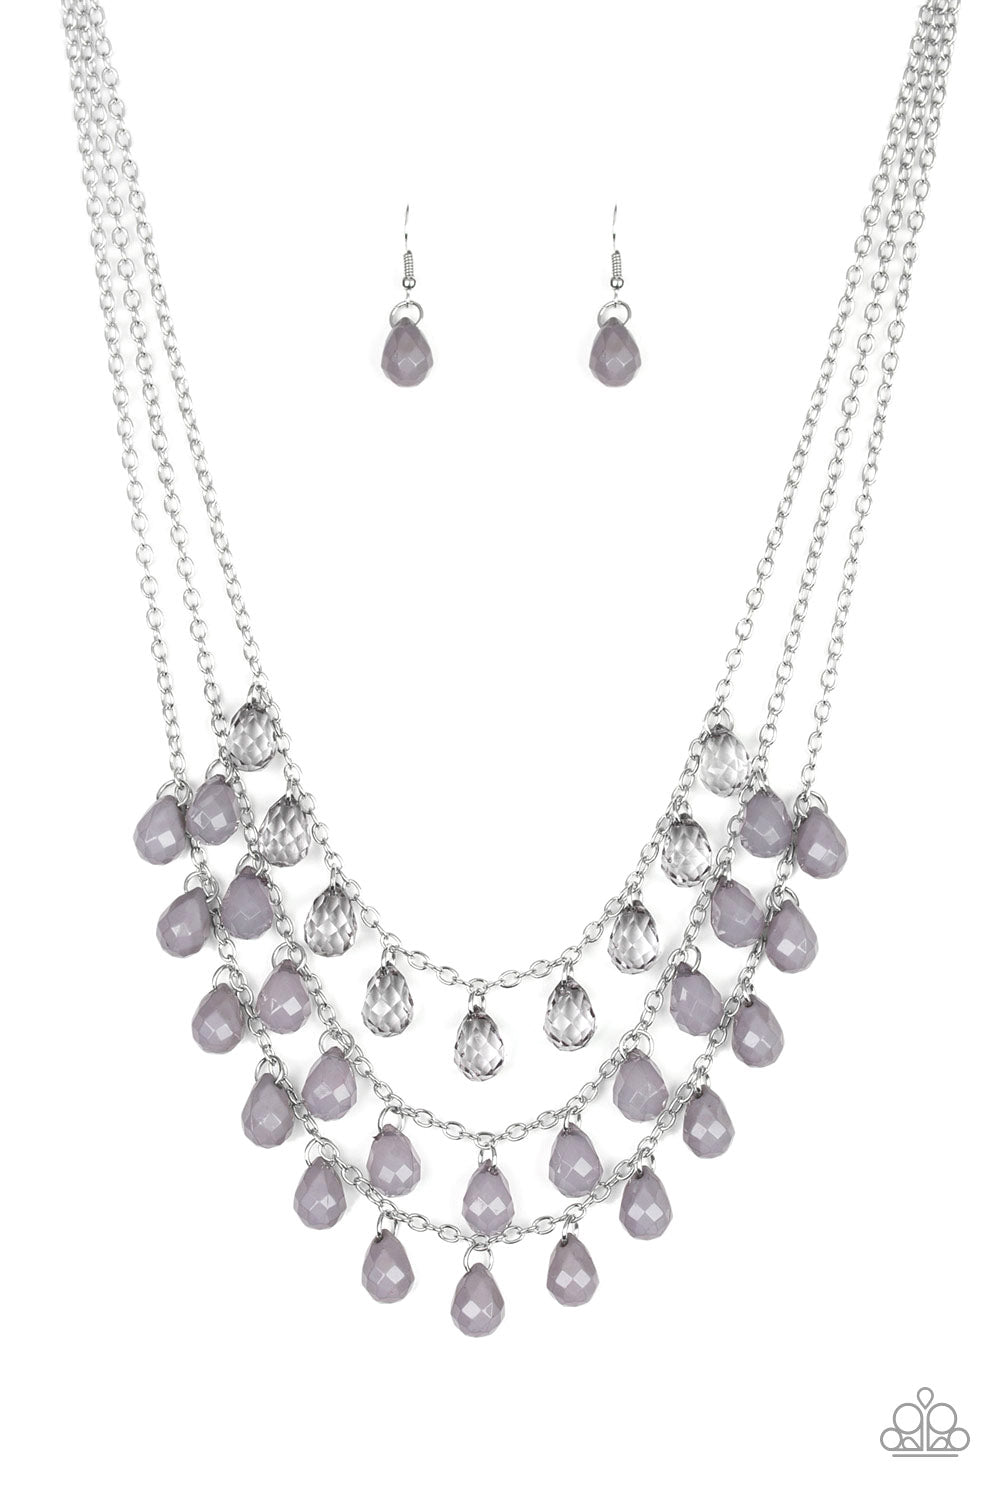 five-dollar-jewelry-melting-ice-caps-silver-necklace-paparazzi-accessories